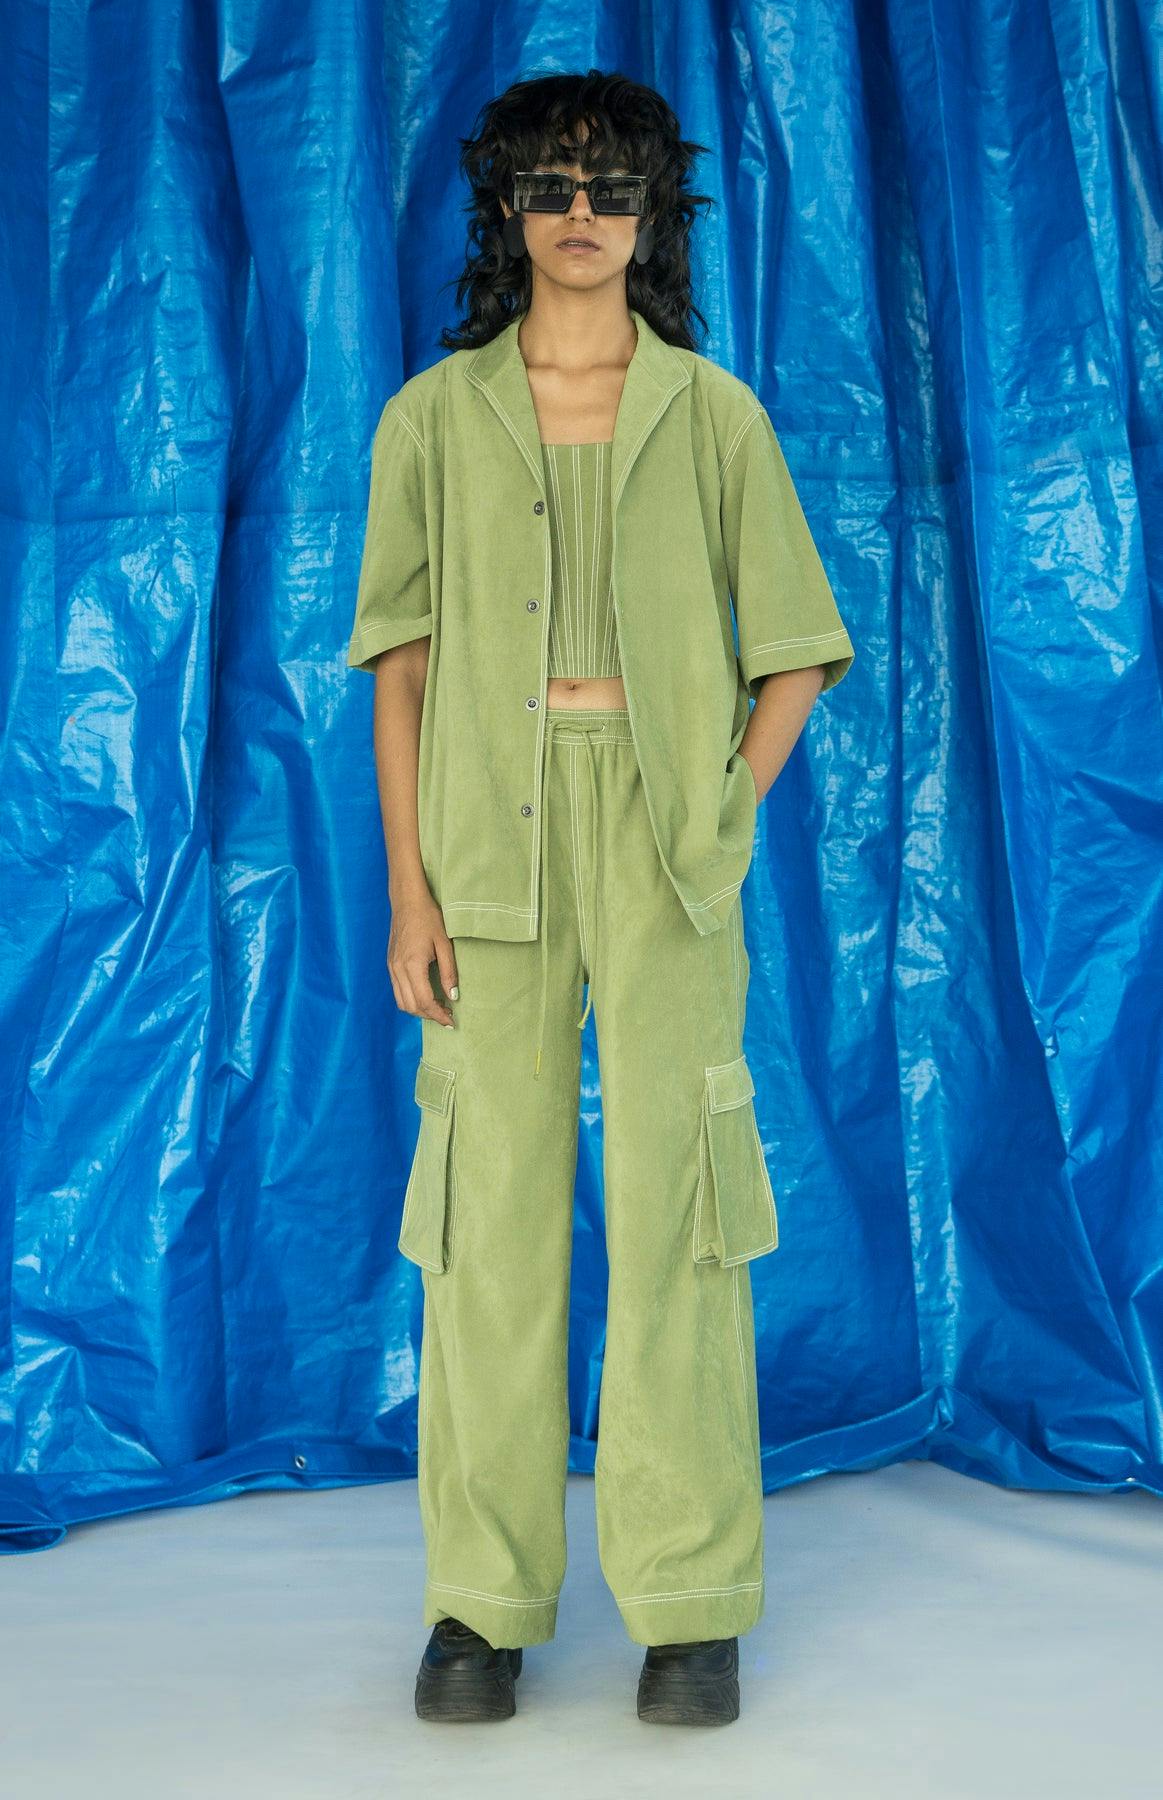 TOTA CO-ORD, a product by Doh tak keh